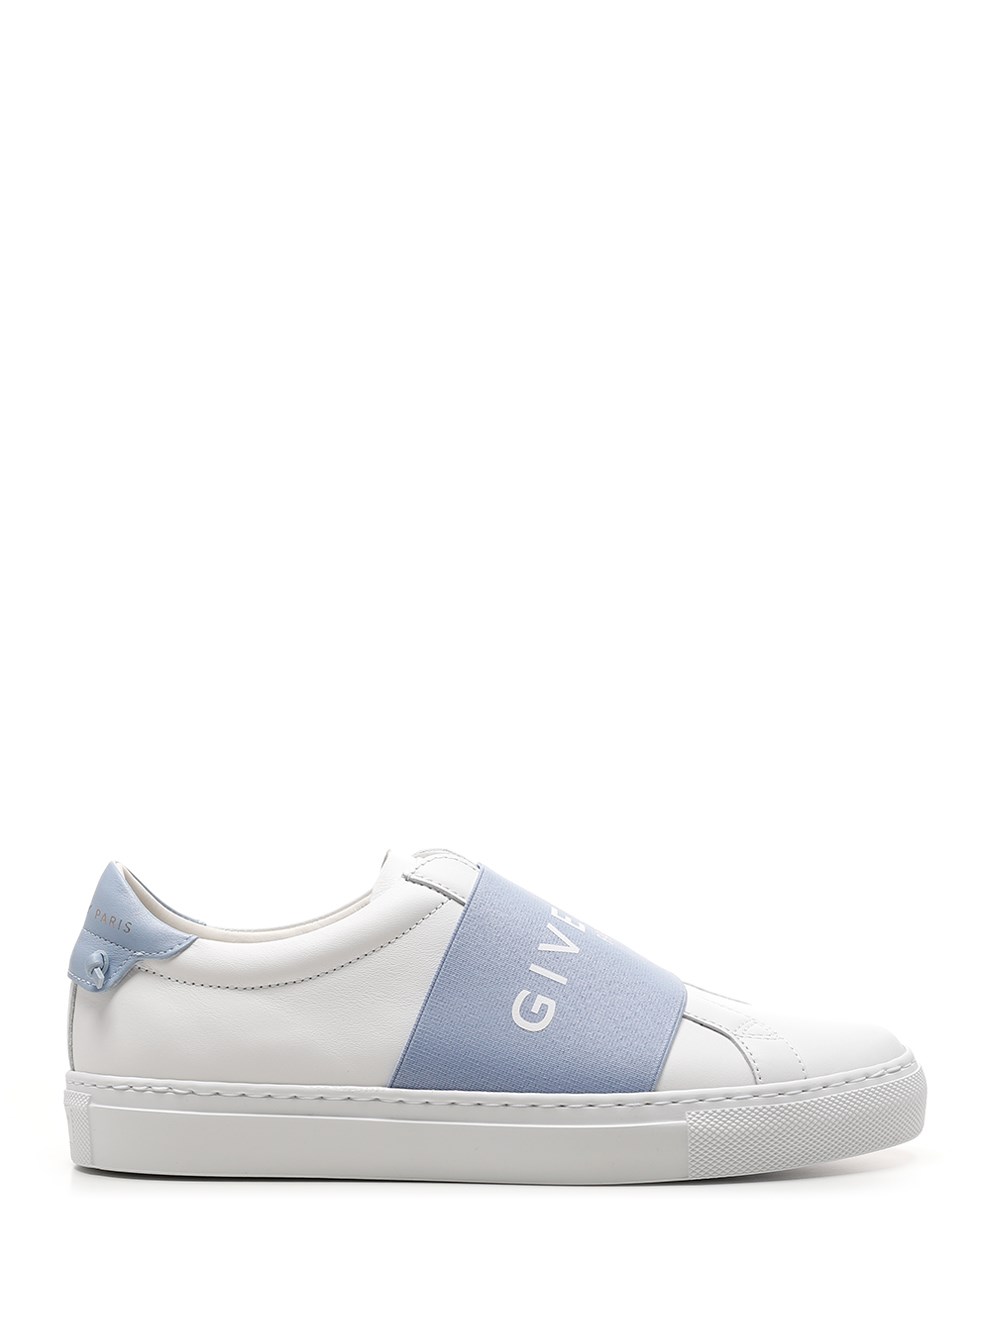 givenchy elastic sneakers